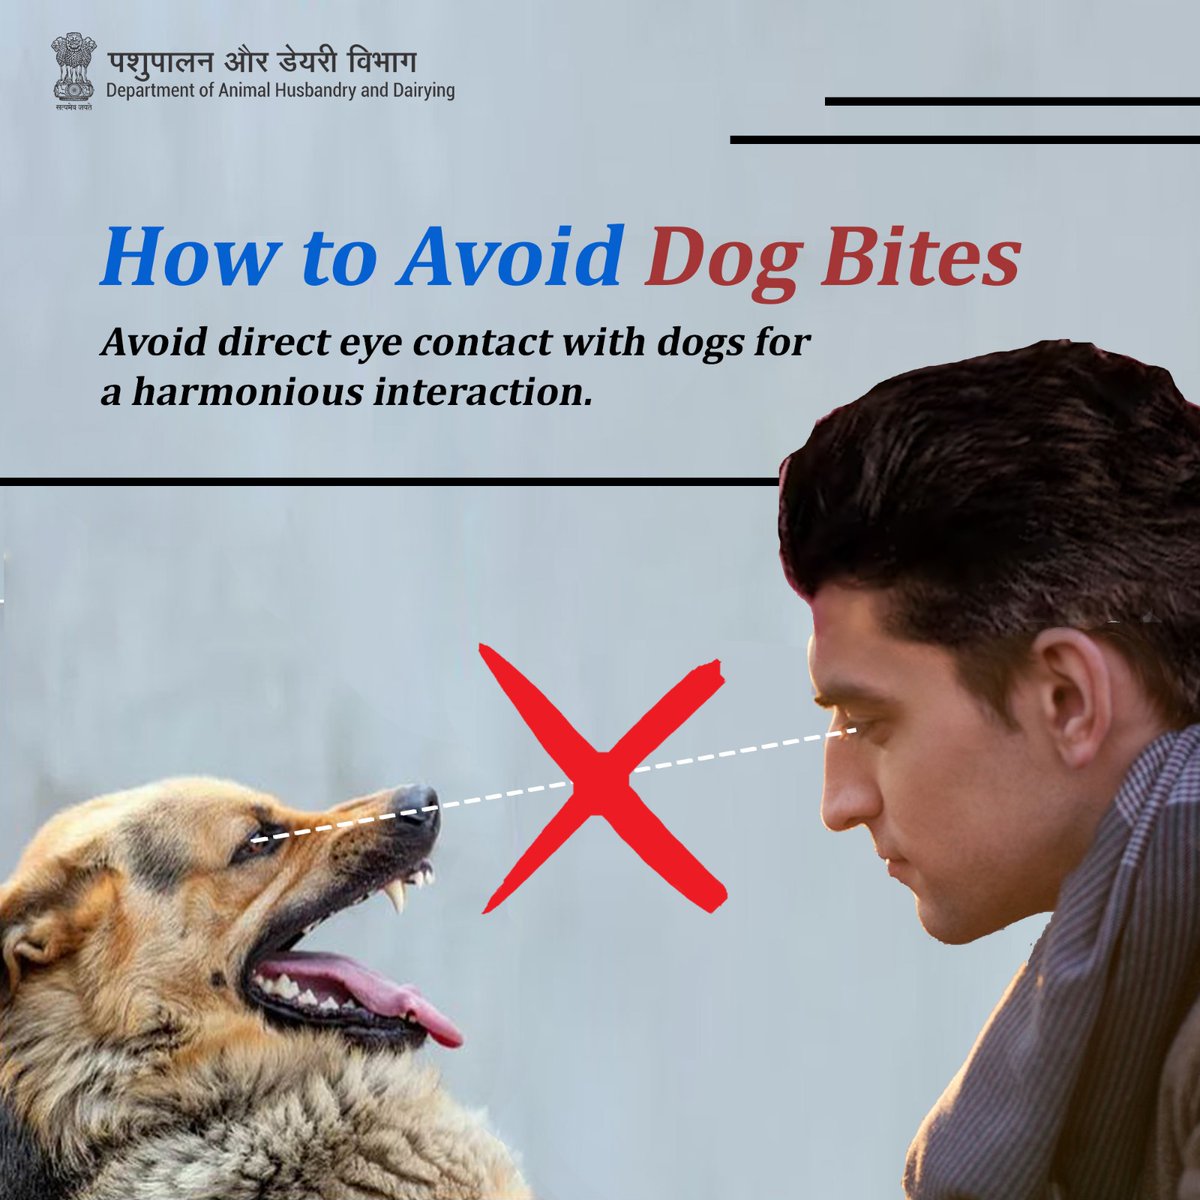 Keep the peace: Avoid direct eye contact with dogs to prevent bites. #DogSafety #PreventRabies #VaccinateNow